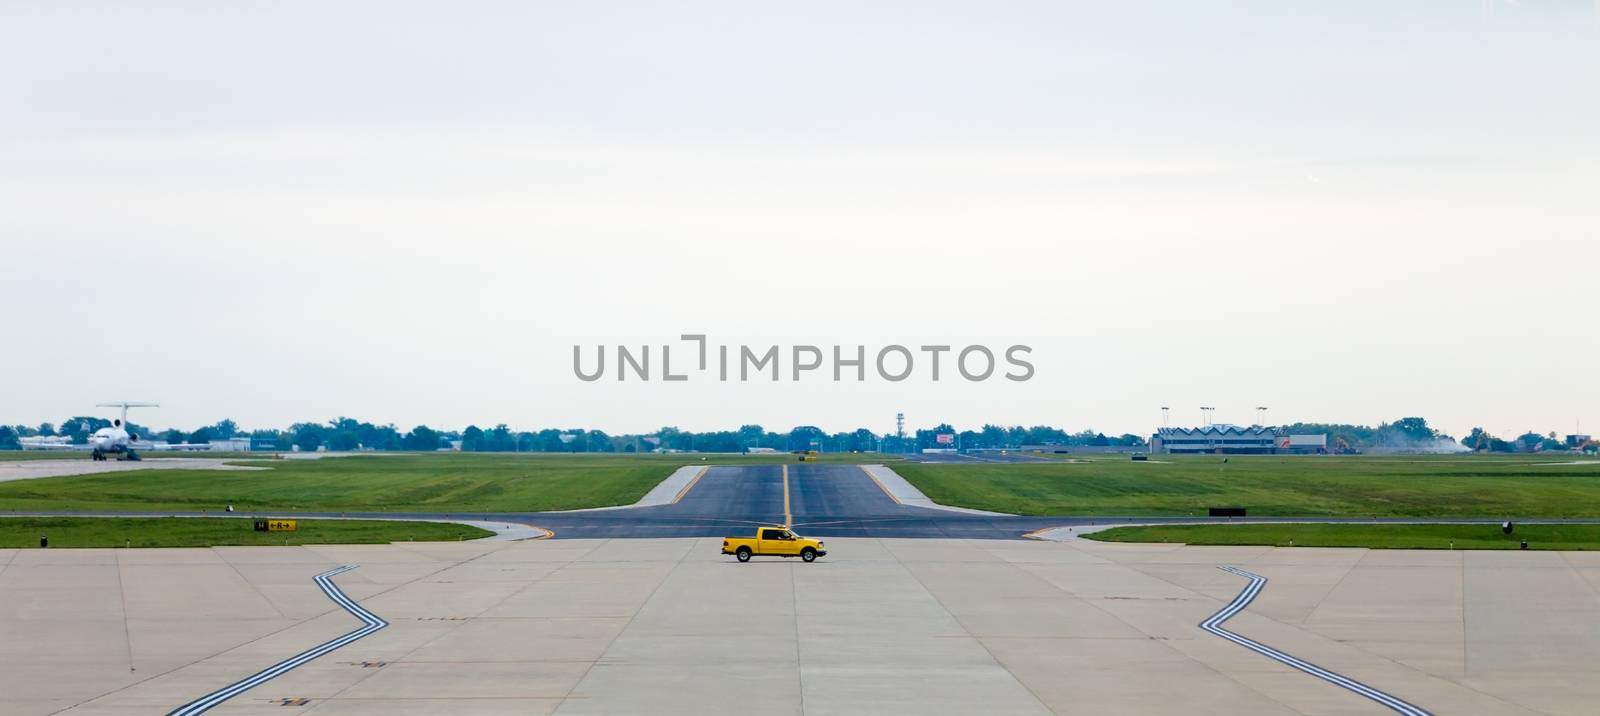 A yellow servicing truck moving on the middle of airport runway